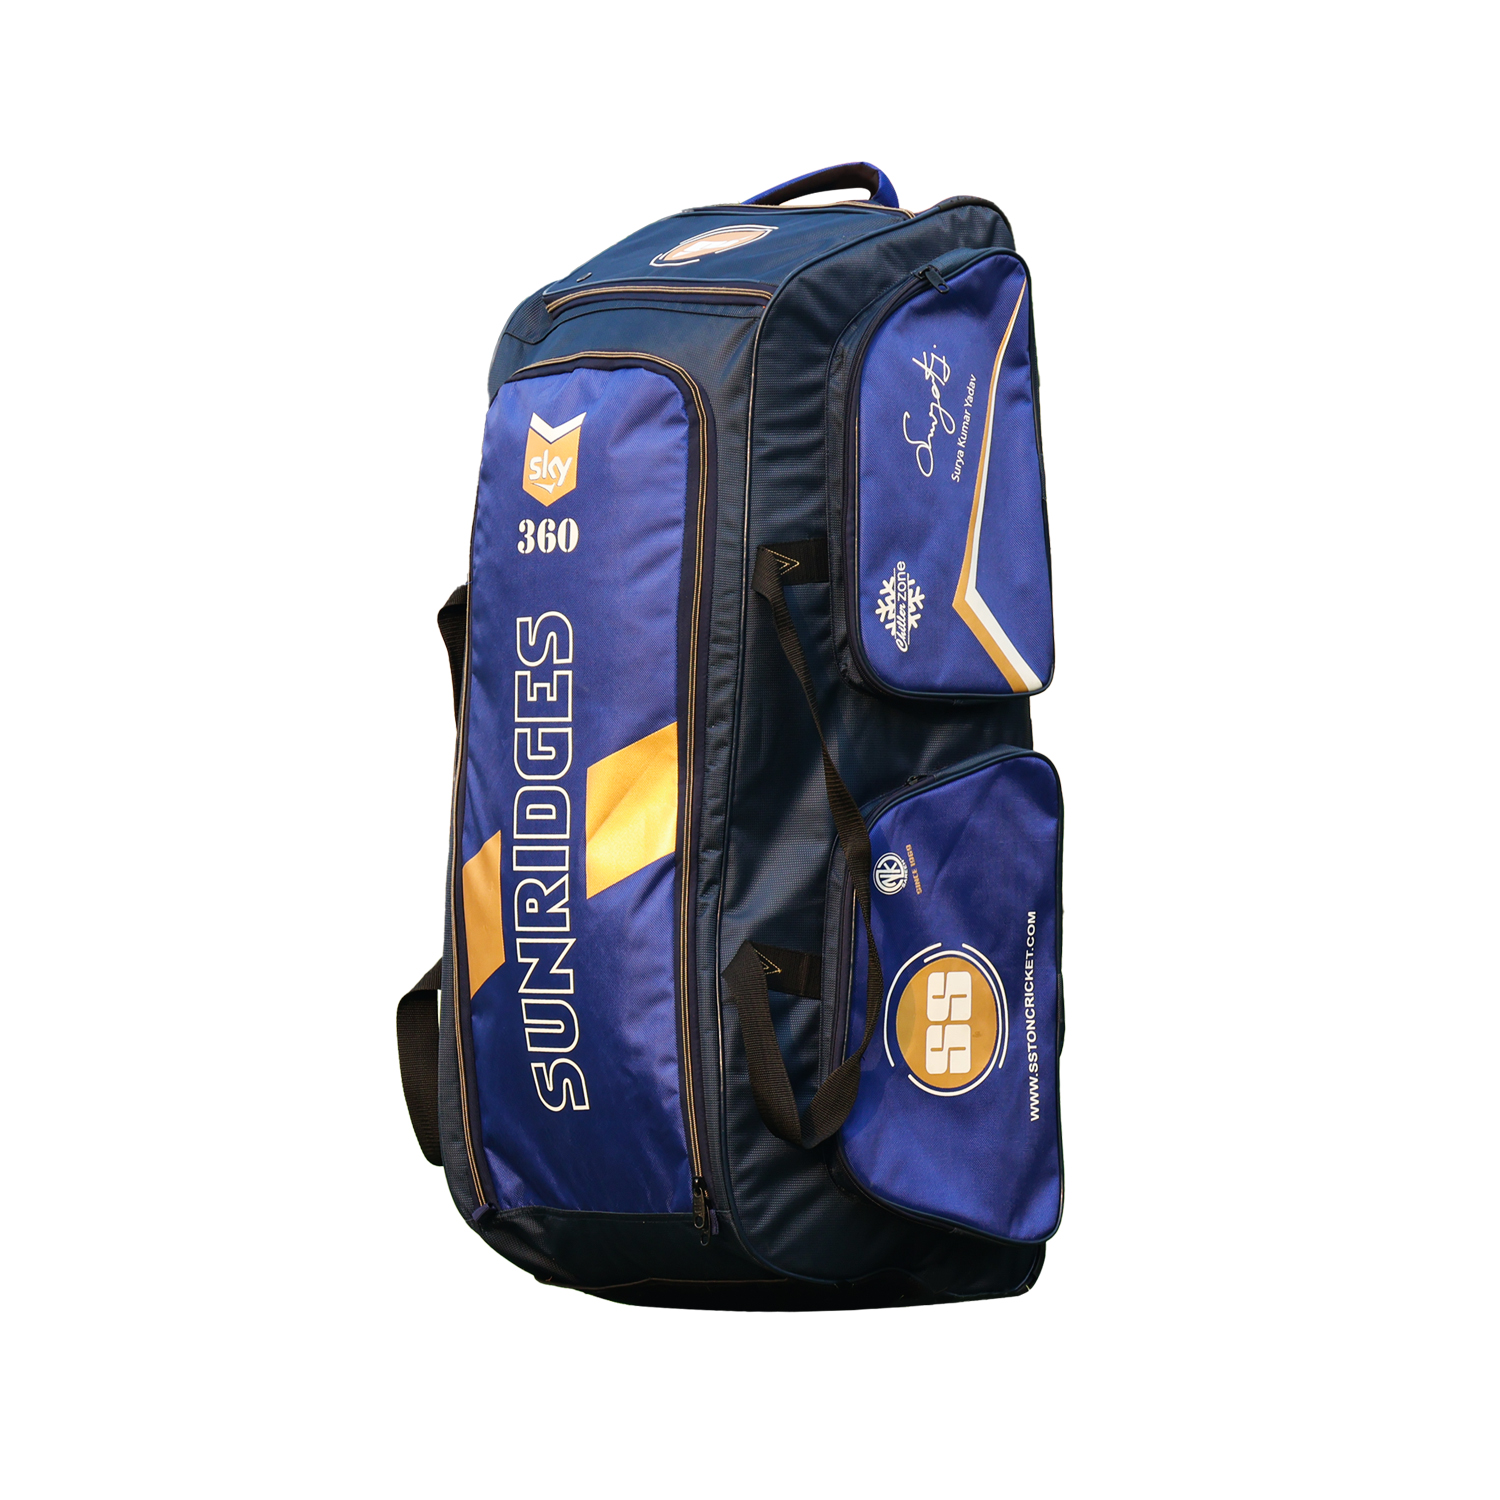 Buy String Bag With Sipper Pocket Online in India | Nivia Sports